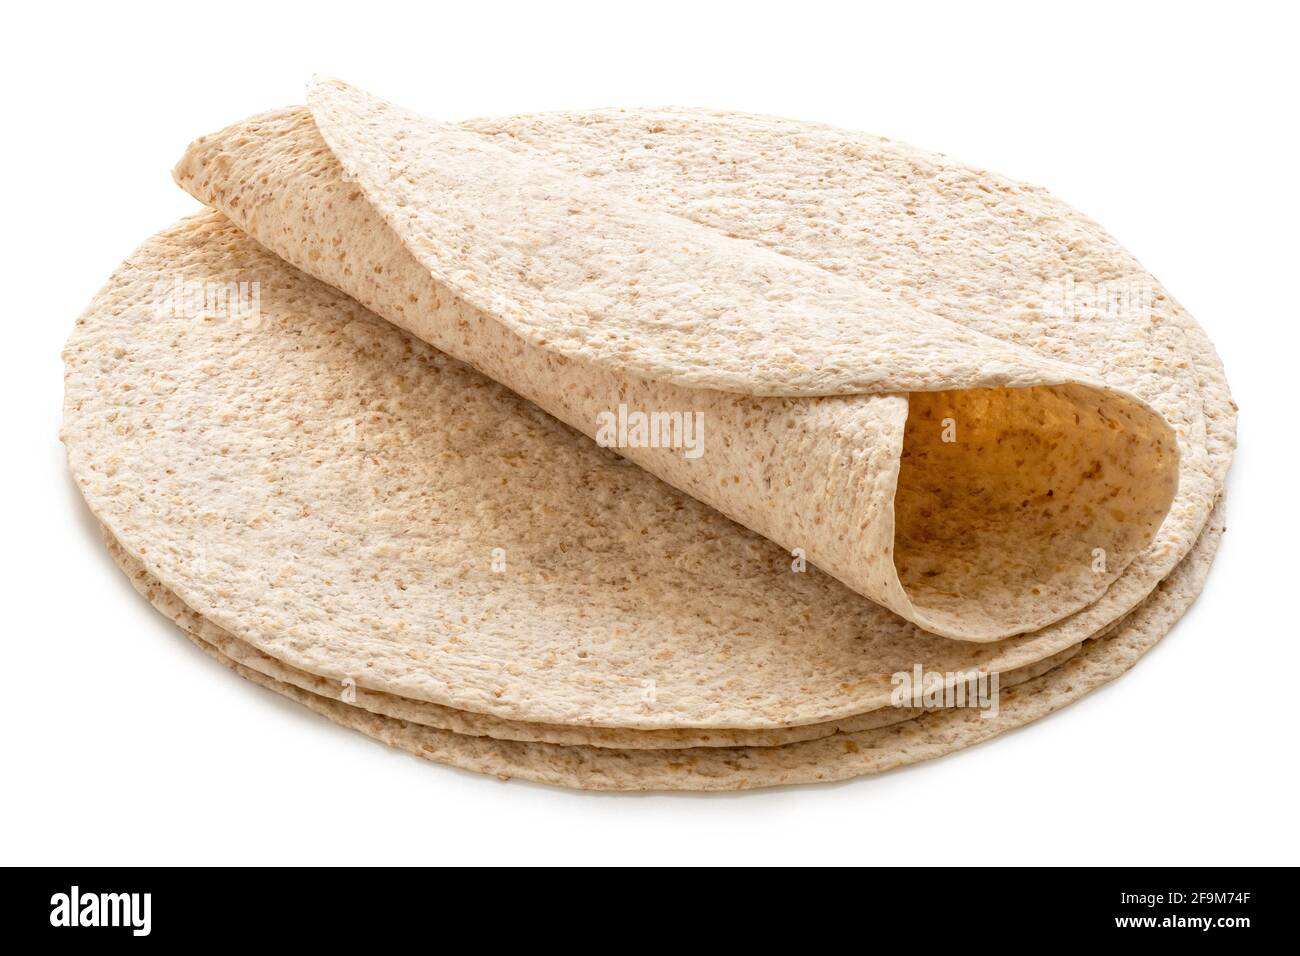 Rolled up tortilla on top of a stack of plain spelt and oat tortilla wraps isolated on white. Stock Photo